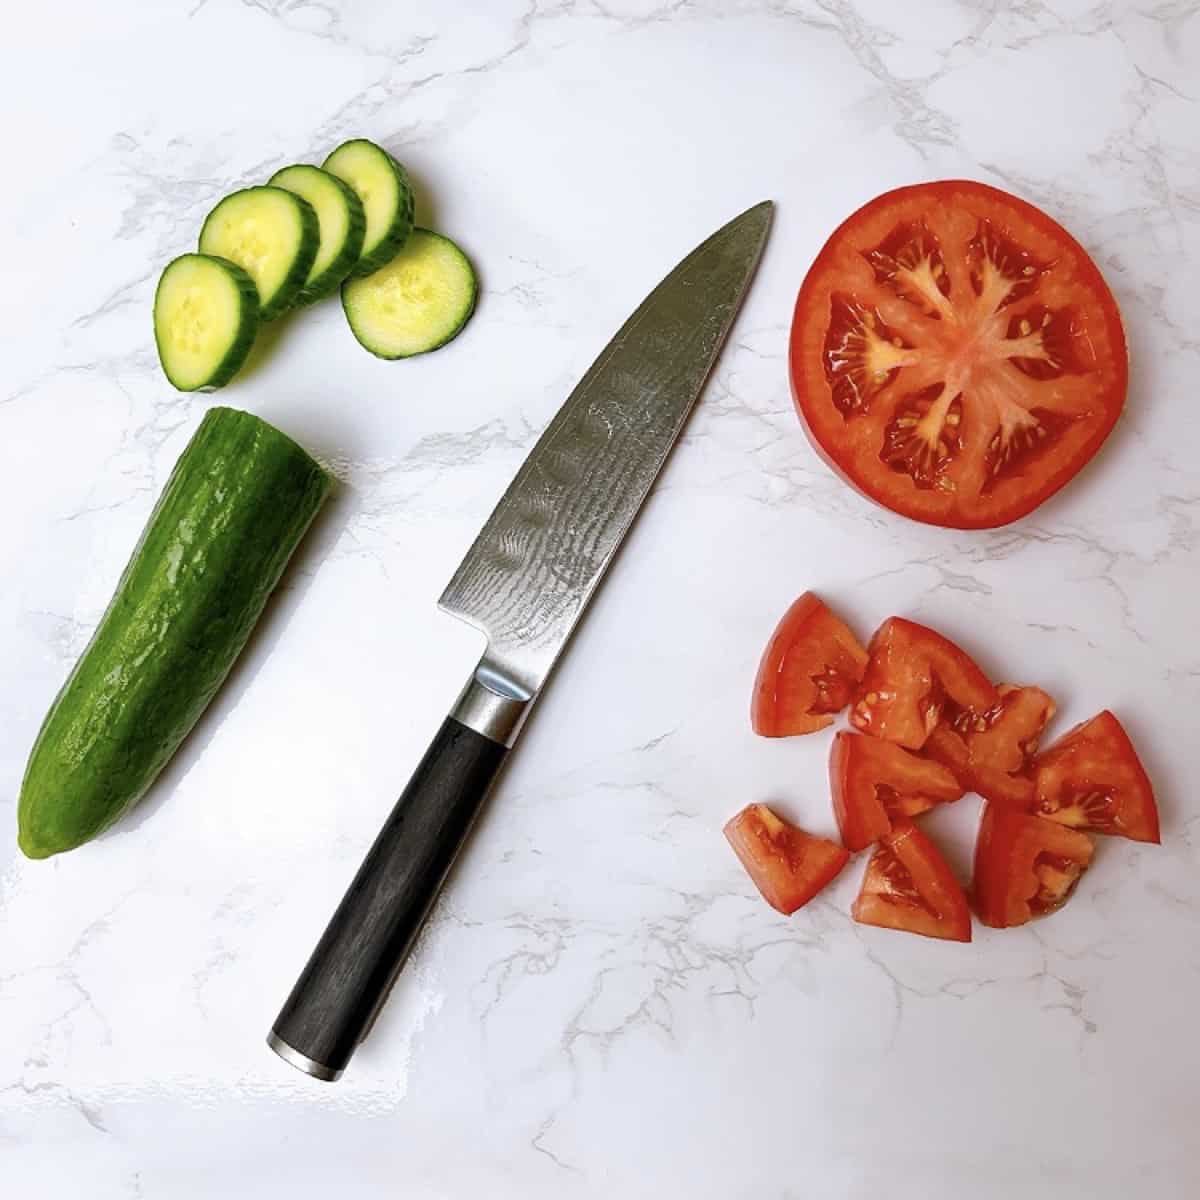 Salad ingredients tomato and cucumber chopped with knife